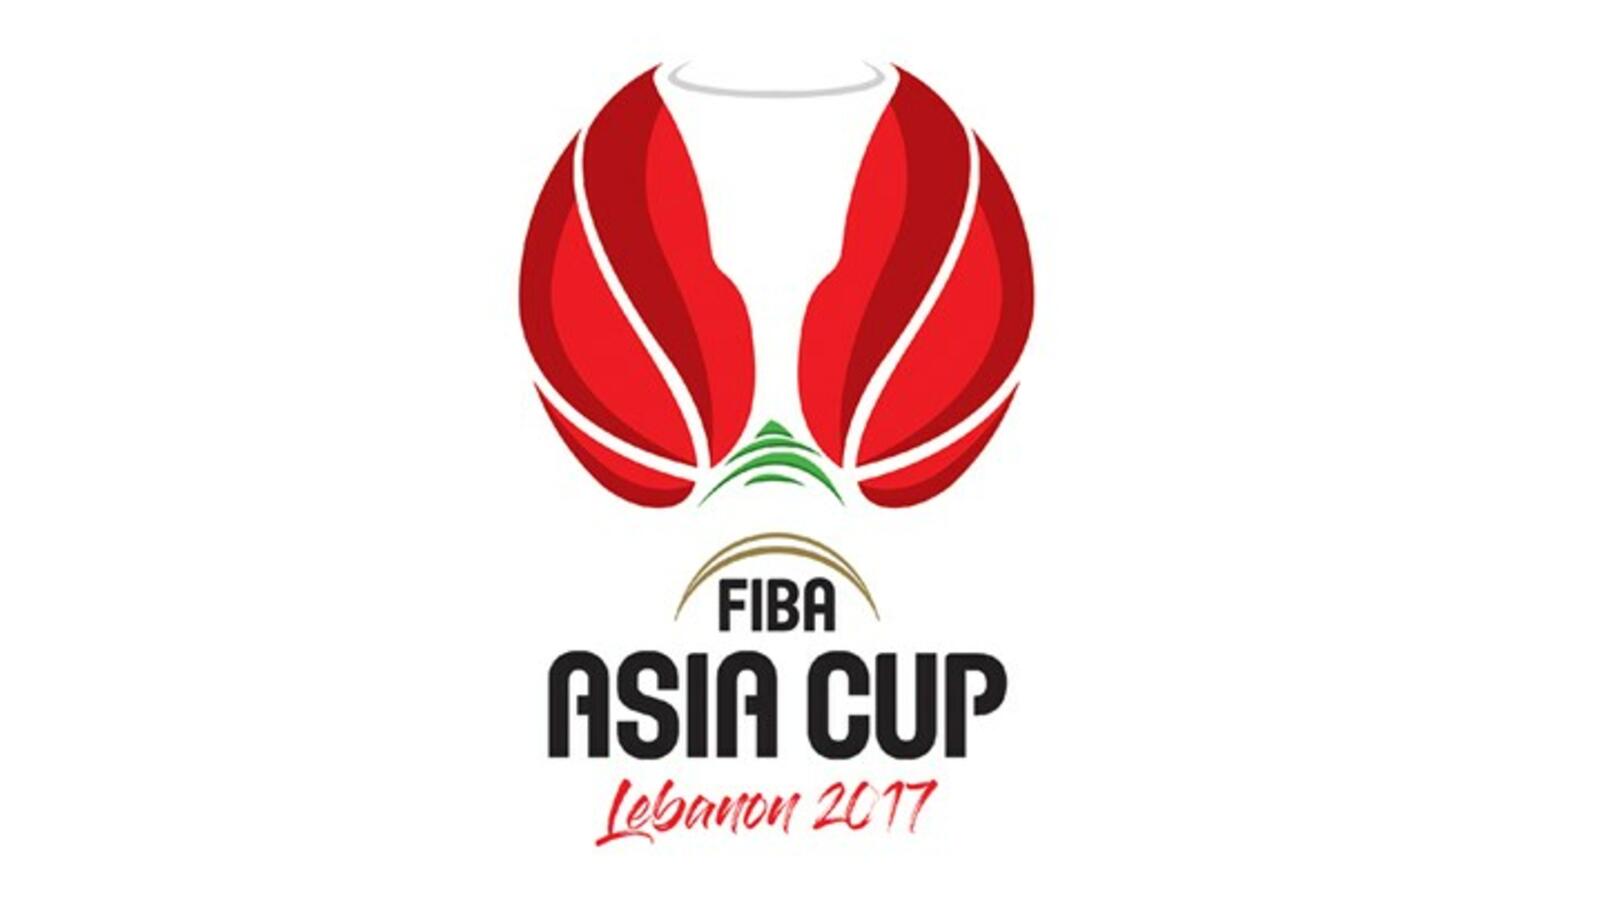 Lebanon Logo - FIBA Asia Cup set to tip off for first time in Lebanon